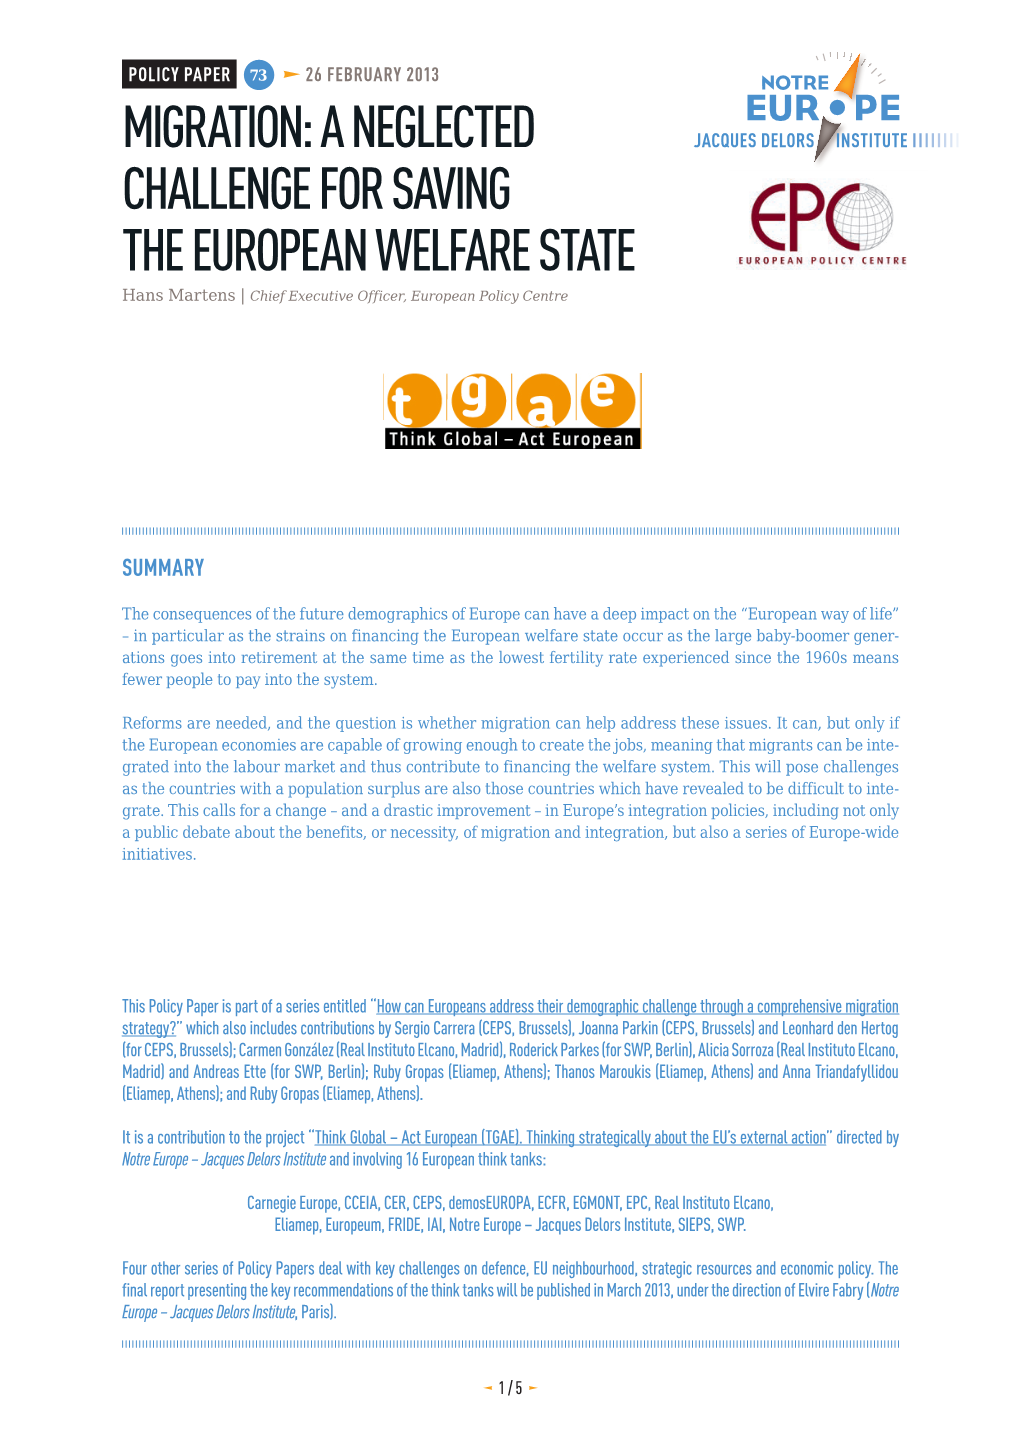 MIGRATION: a NEGLECTED CHALLENGE for SAVING the EUROPEAN WELFARE STATE Hans Martens | Chief Executive Officer, European Policy Centre